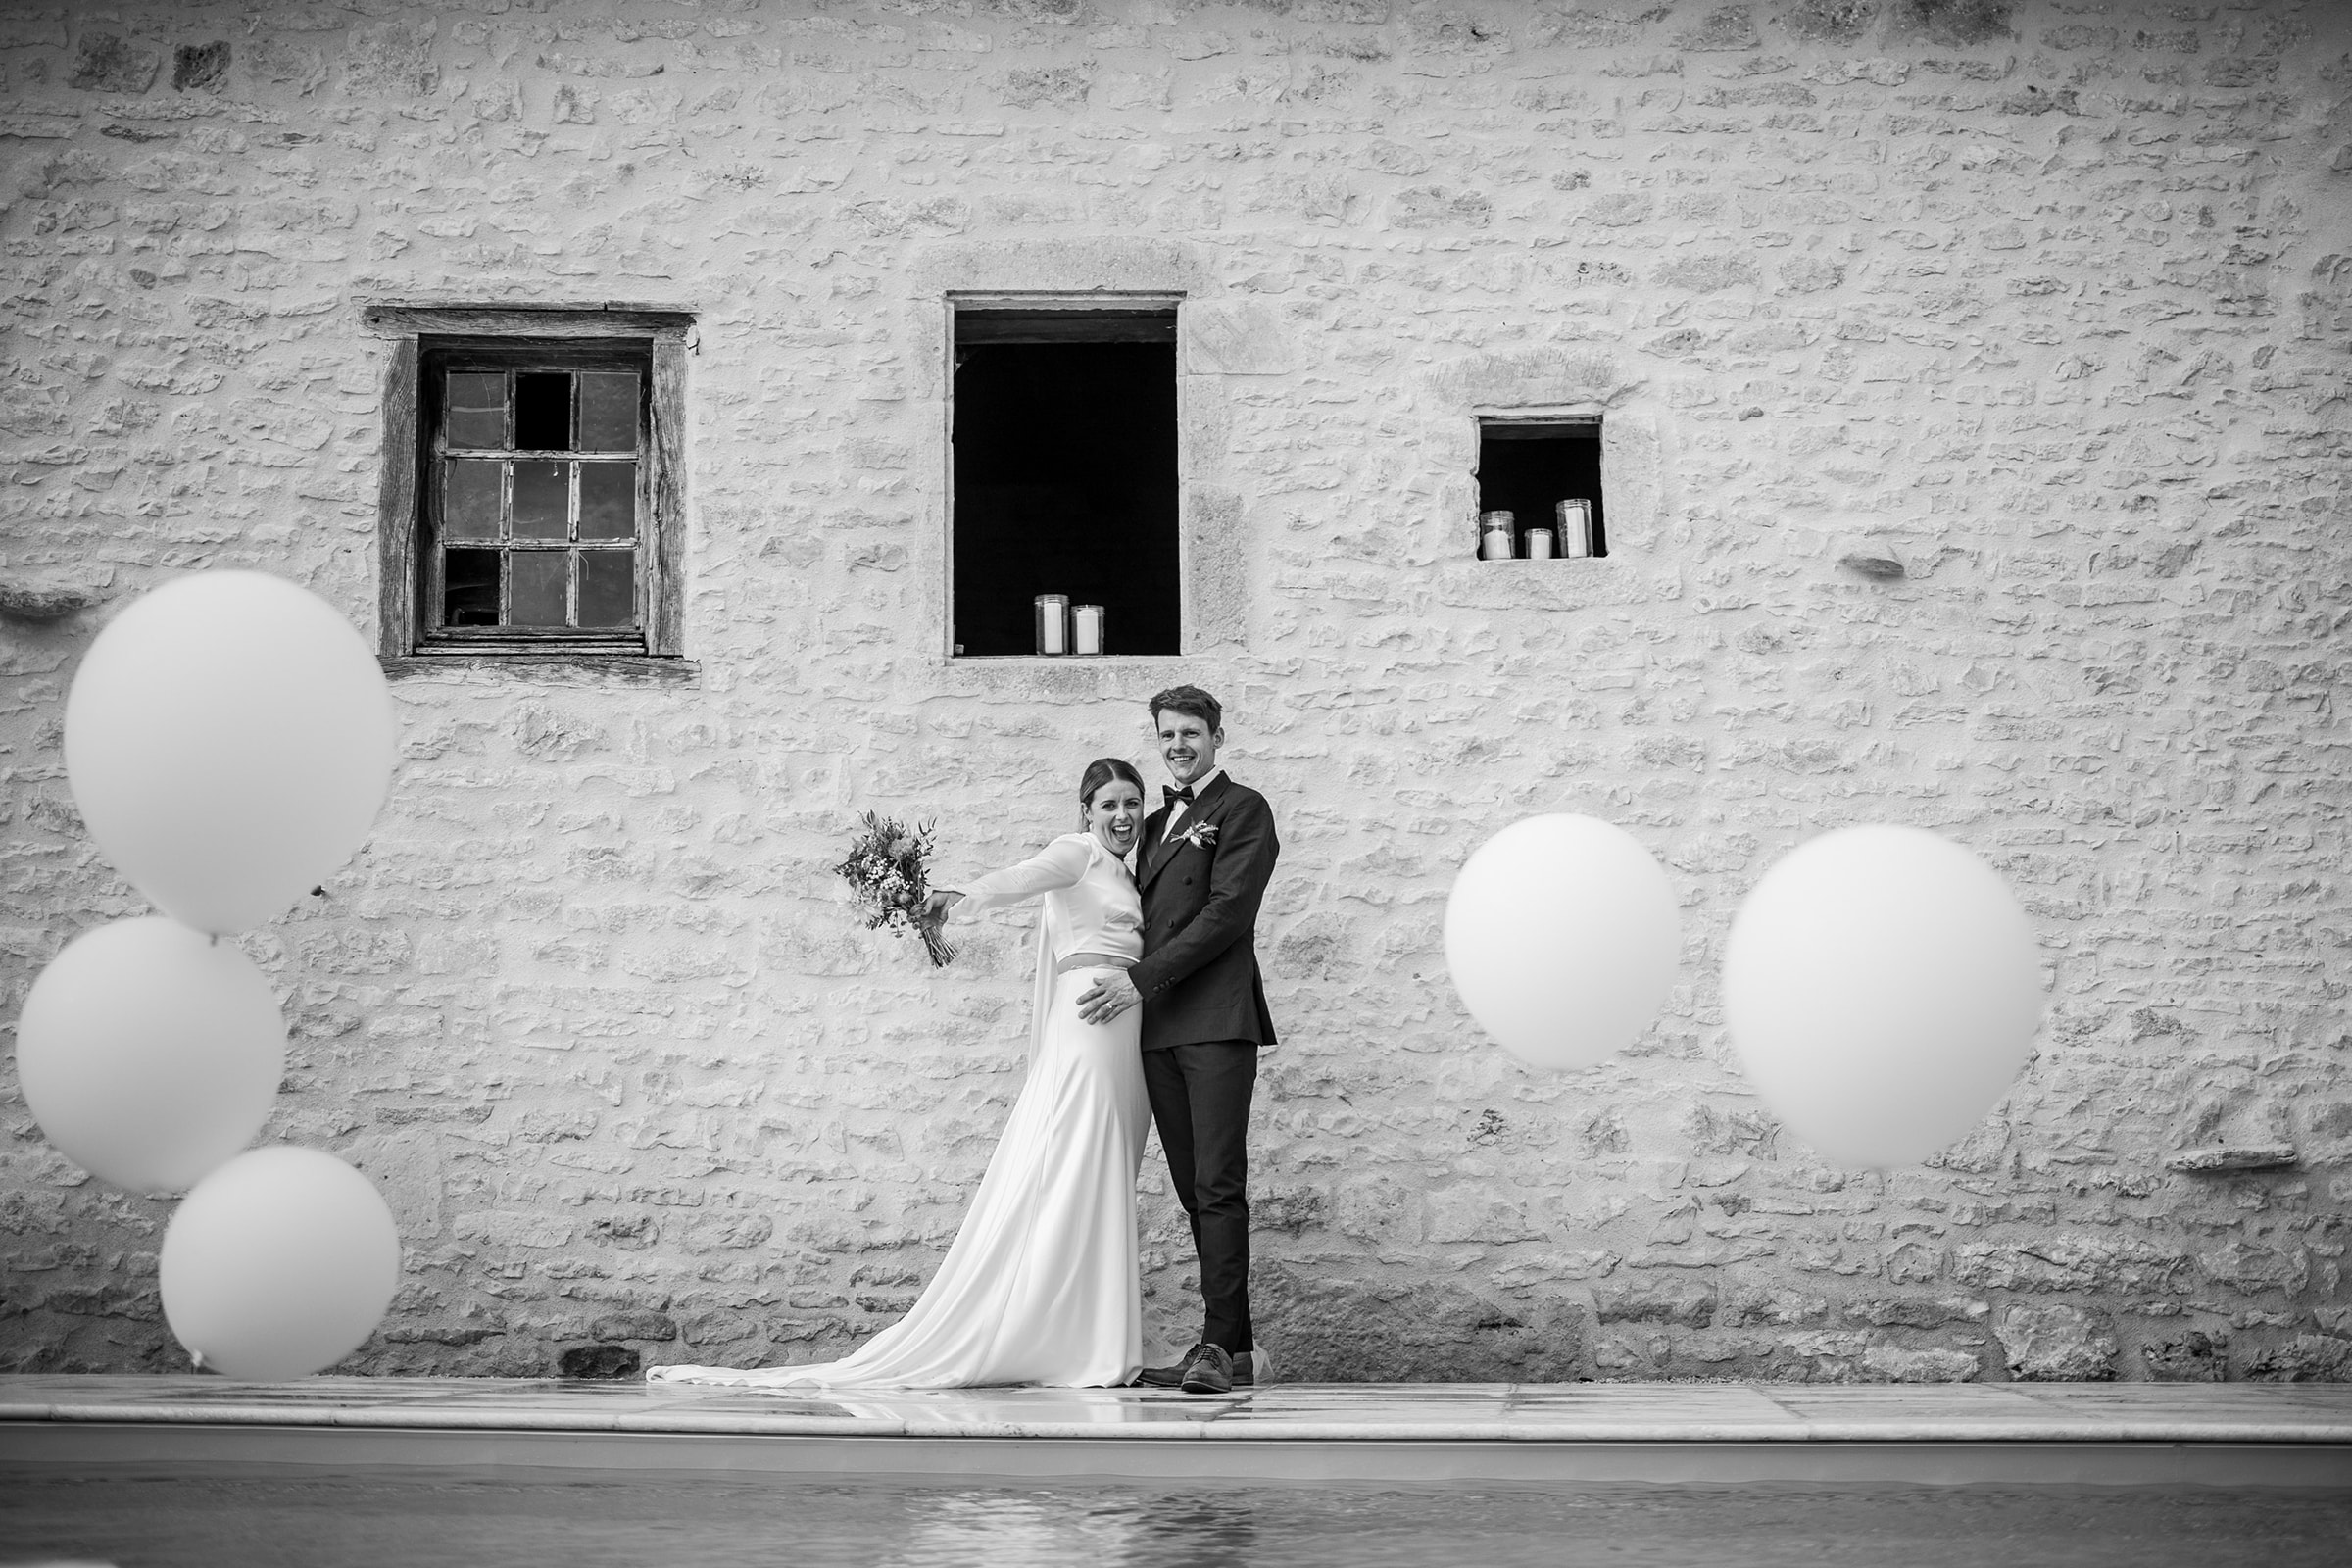 Destination wedding in Benest France, couple by swimming pool